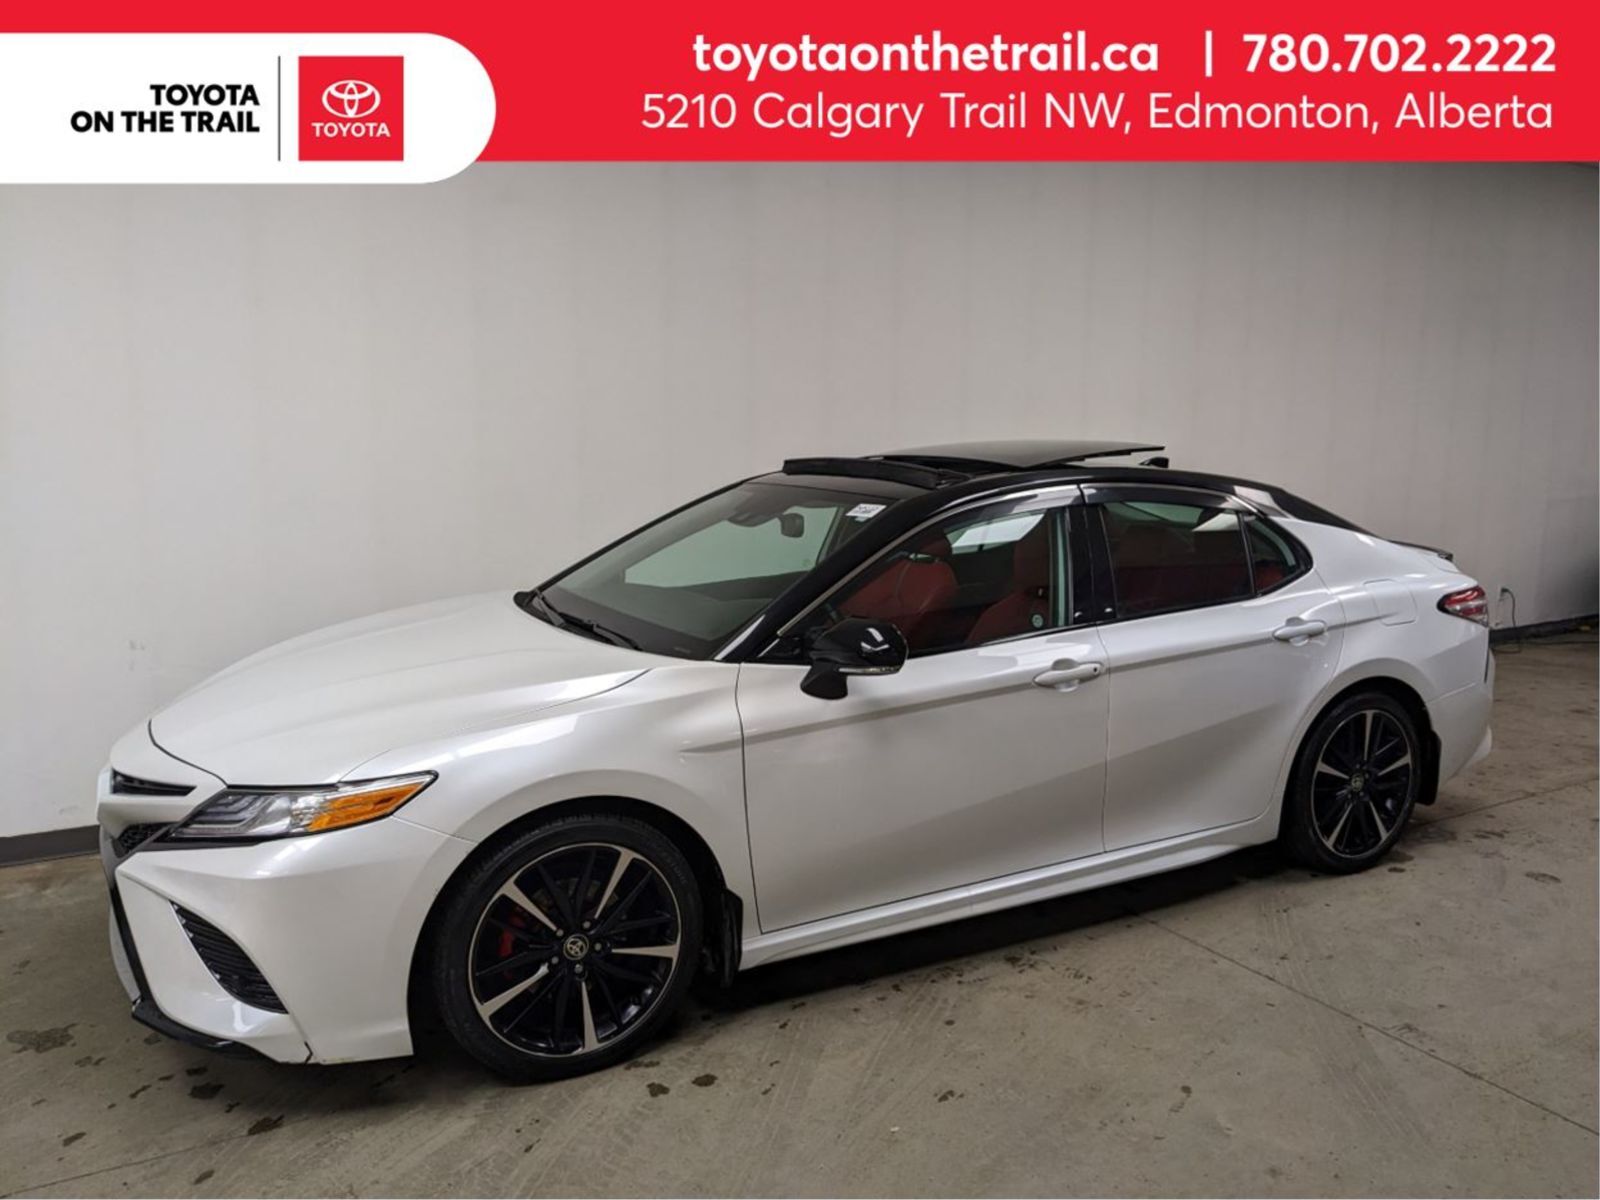 2020 Toyota Camry XSE AWD; LEATHER, PANORAMIC SUNROOF, 3M, REMOTE/SE